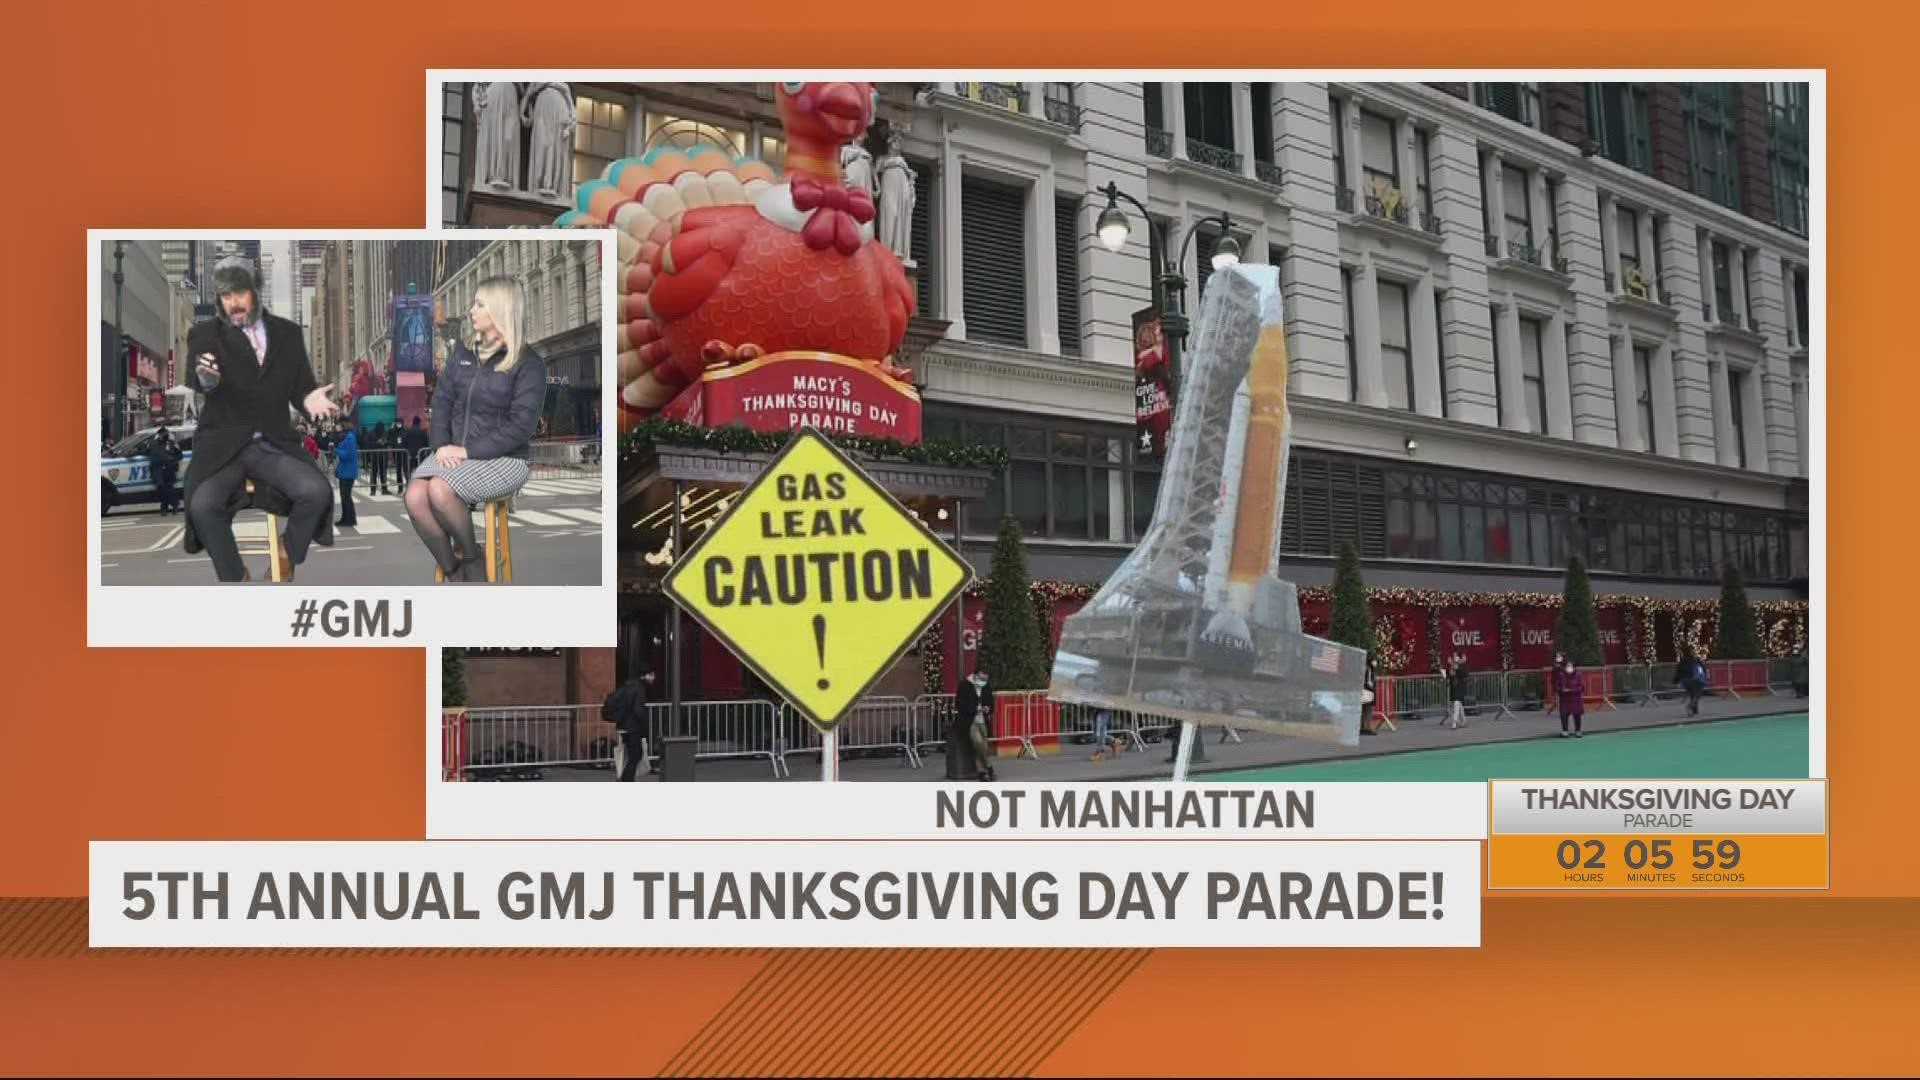 It's that time of year! The GMJ gang is wishing you a happy Thanksgiving while keeping this iconic tradition alive for the 5th year in a row!